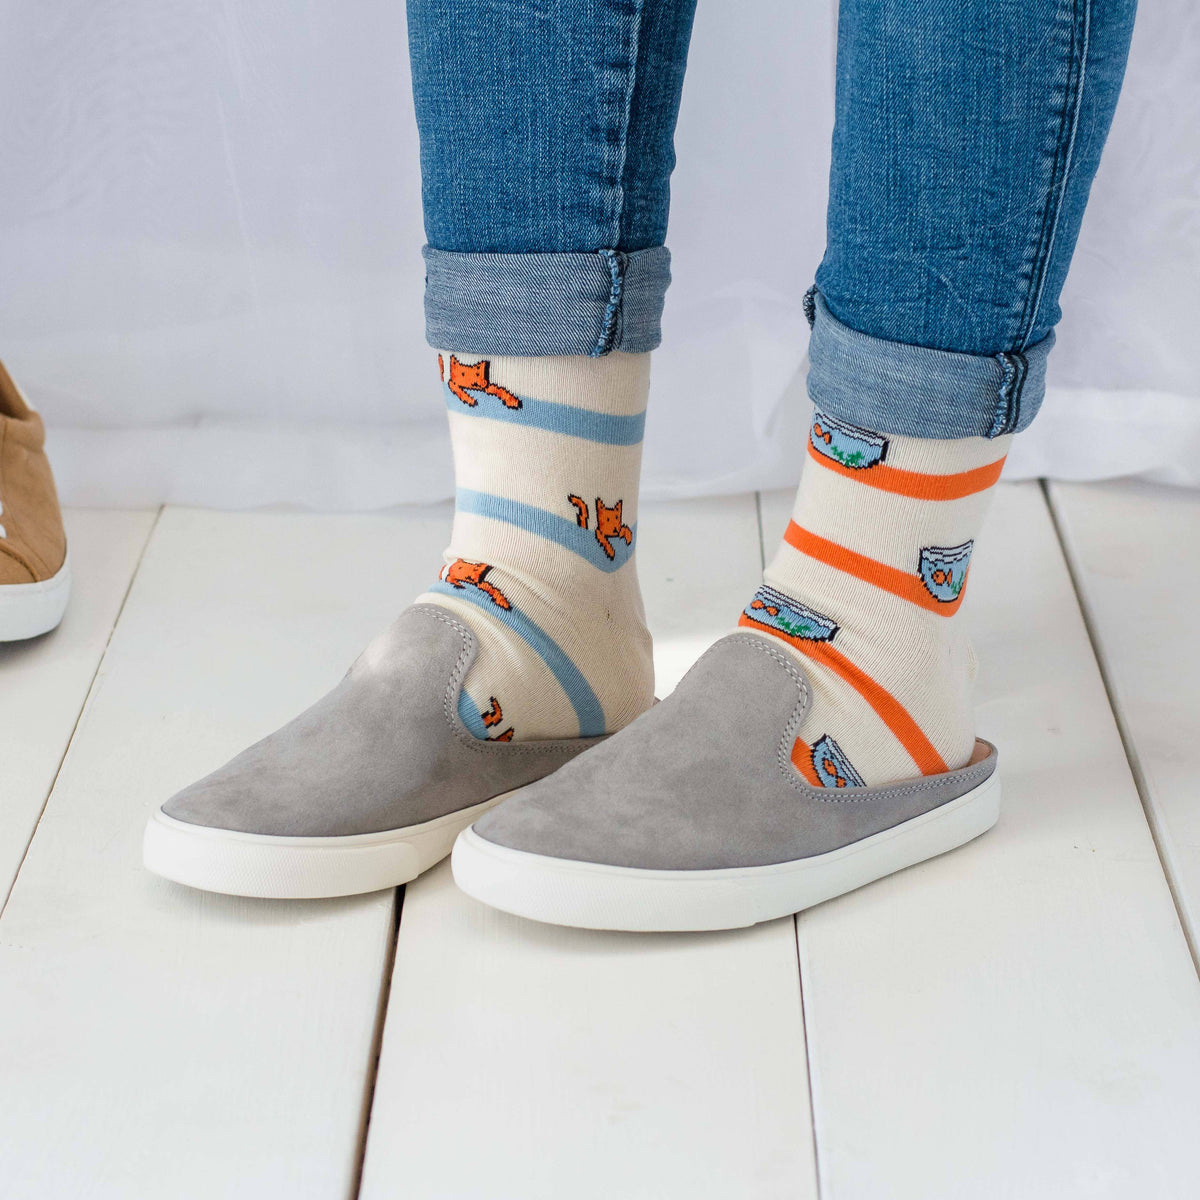 Friday Sock CO - Women’s Socks | Cat and Fishbowl | Ethically Made